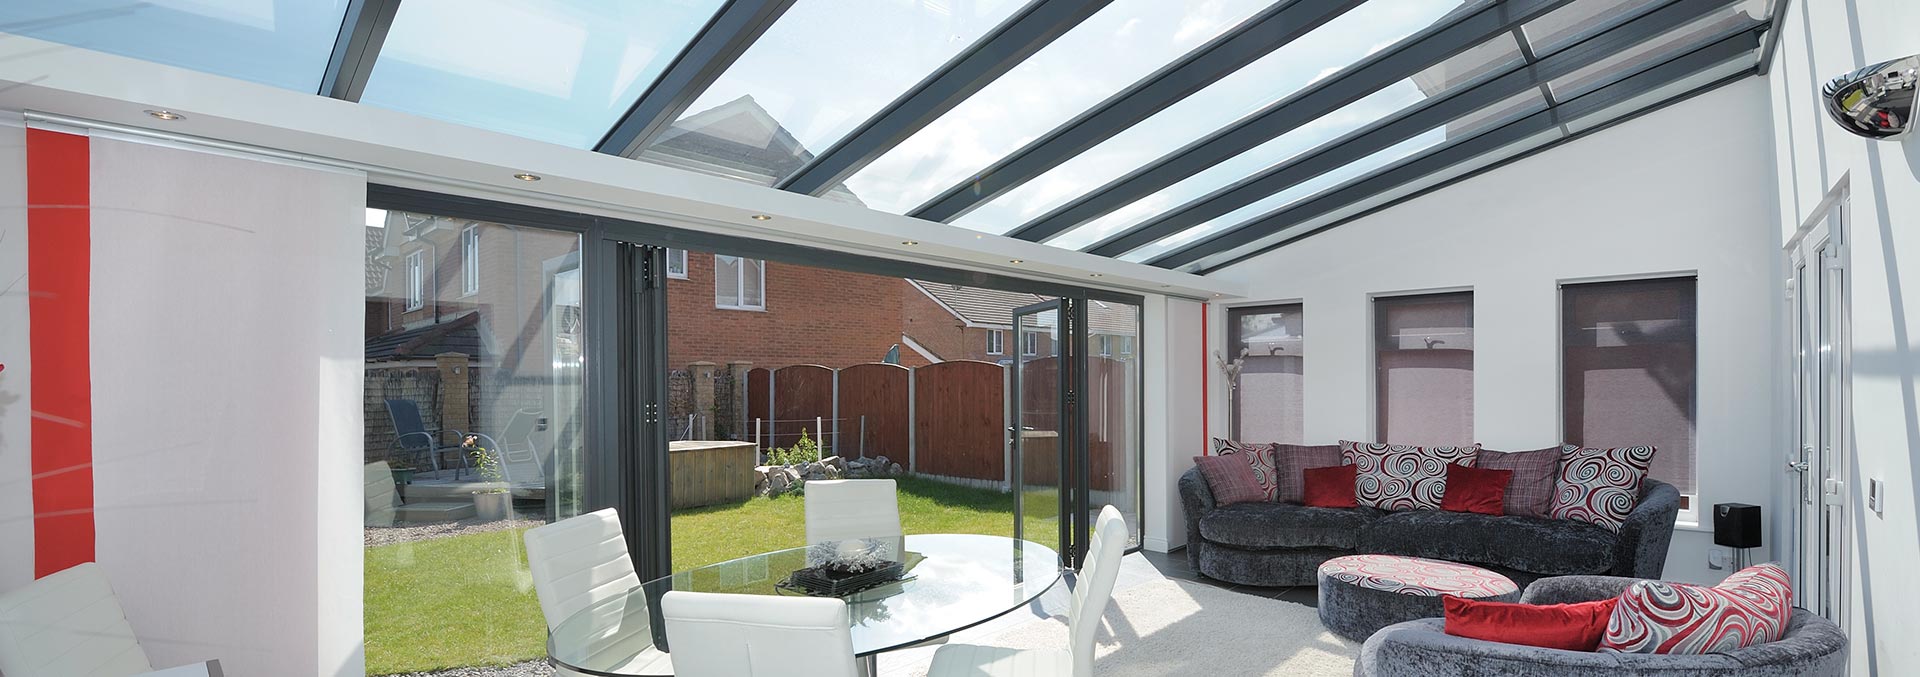 Lean to style uPVC conservatory with bifolding doors